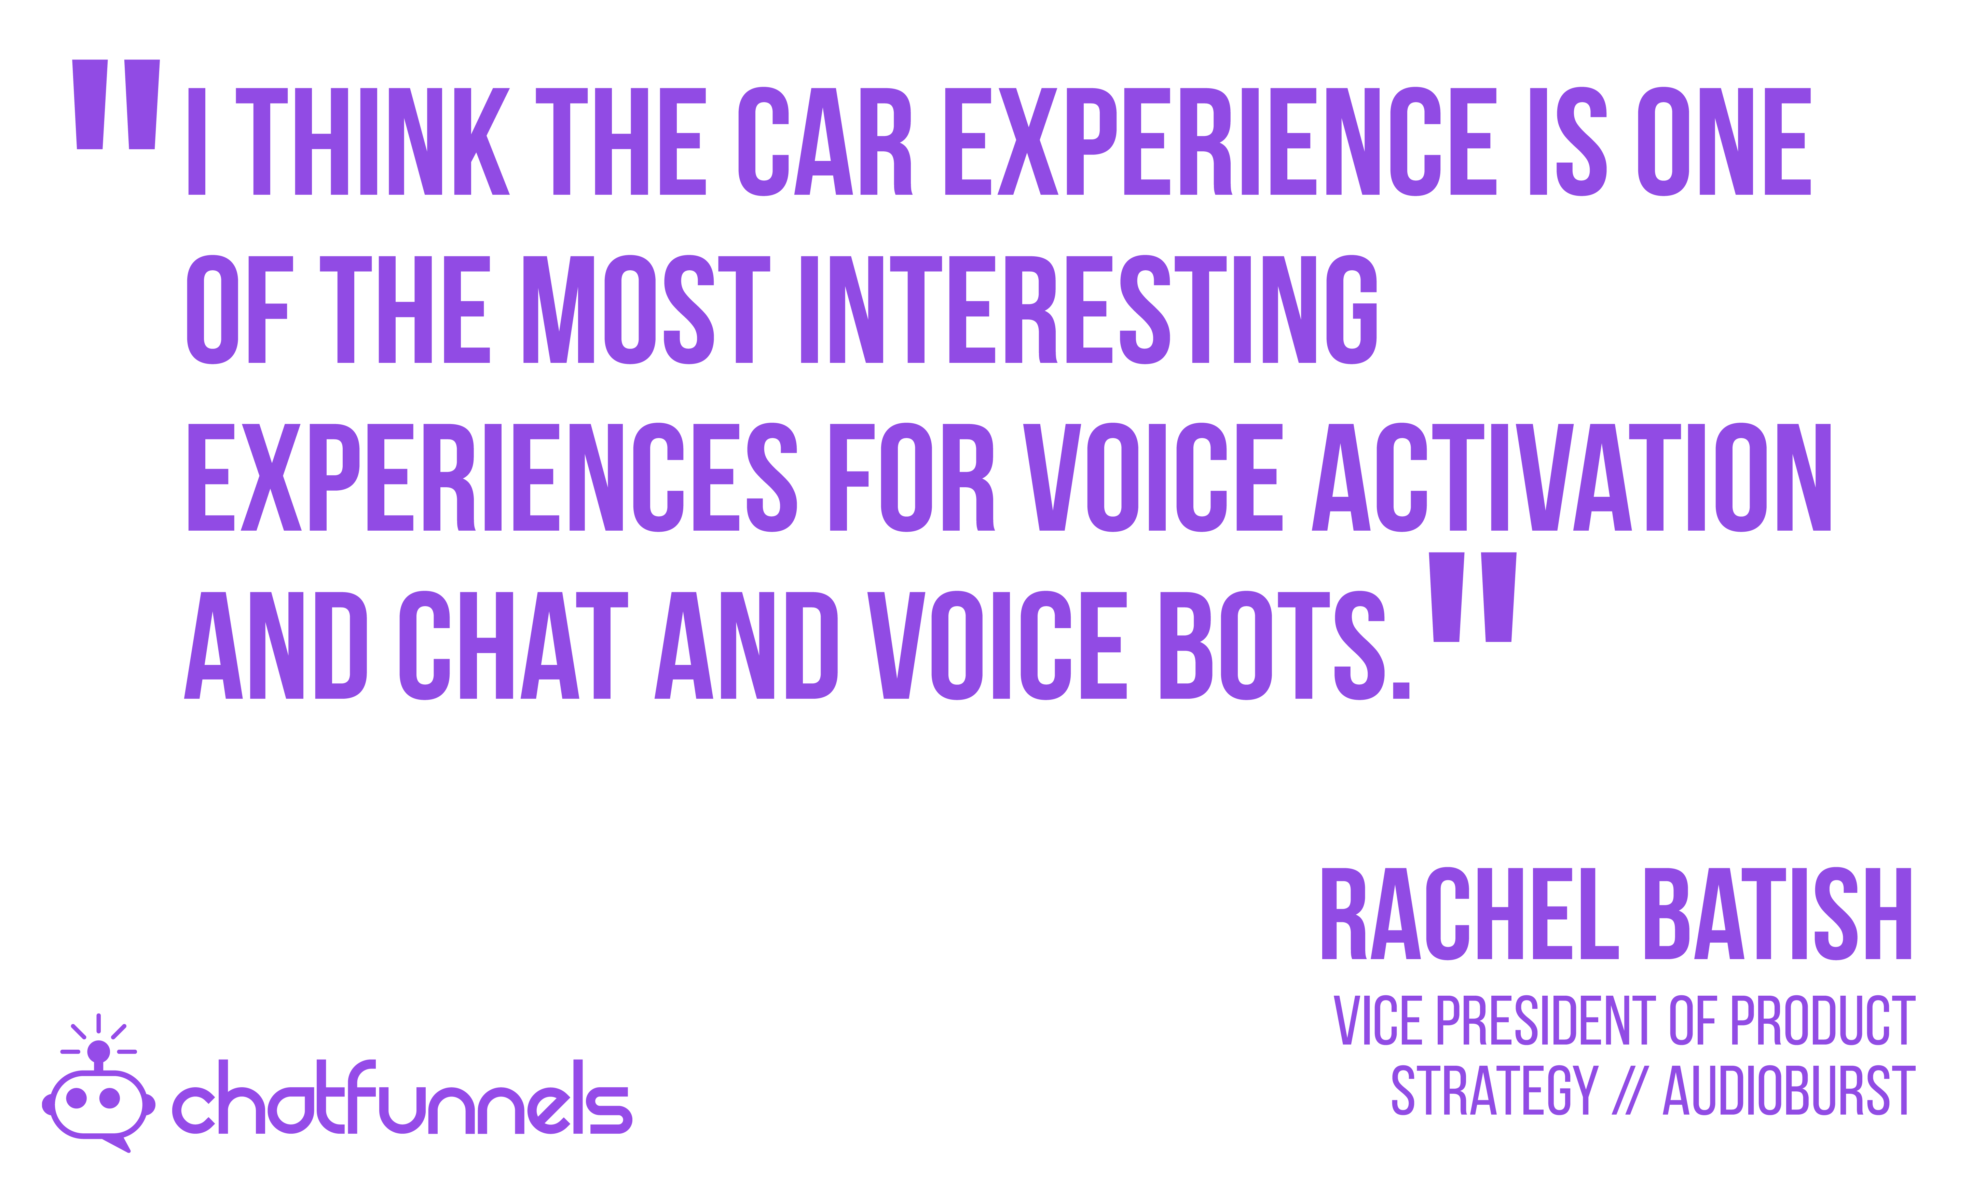 I think the car experience is one of the most interesting experiences for voice activation and chat and voice bots